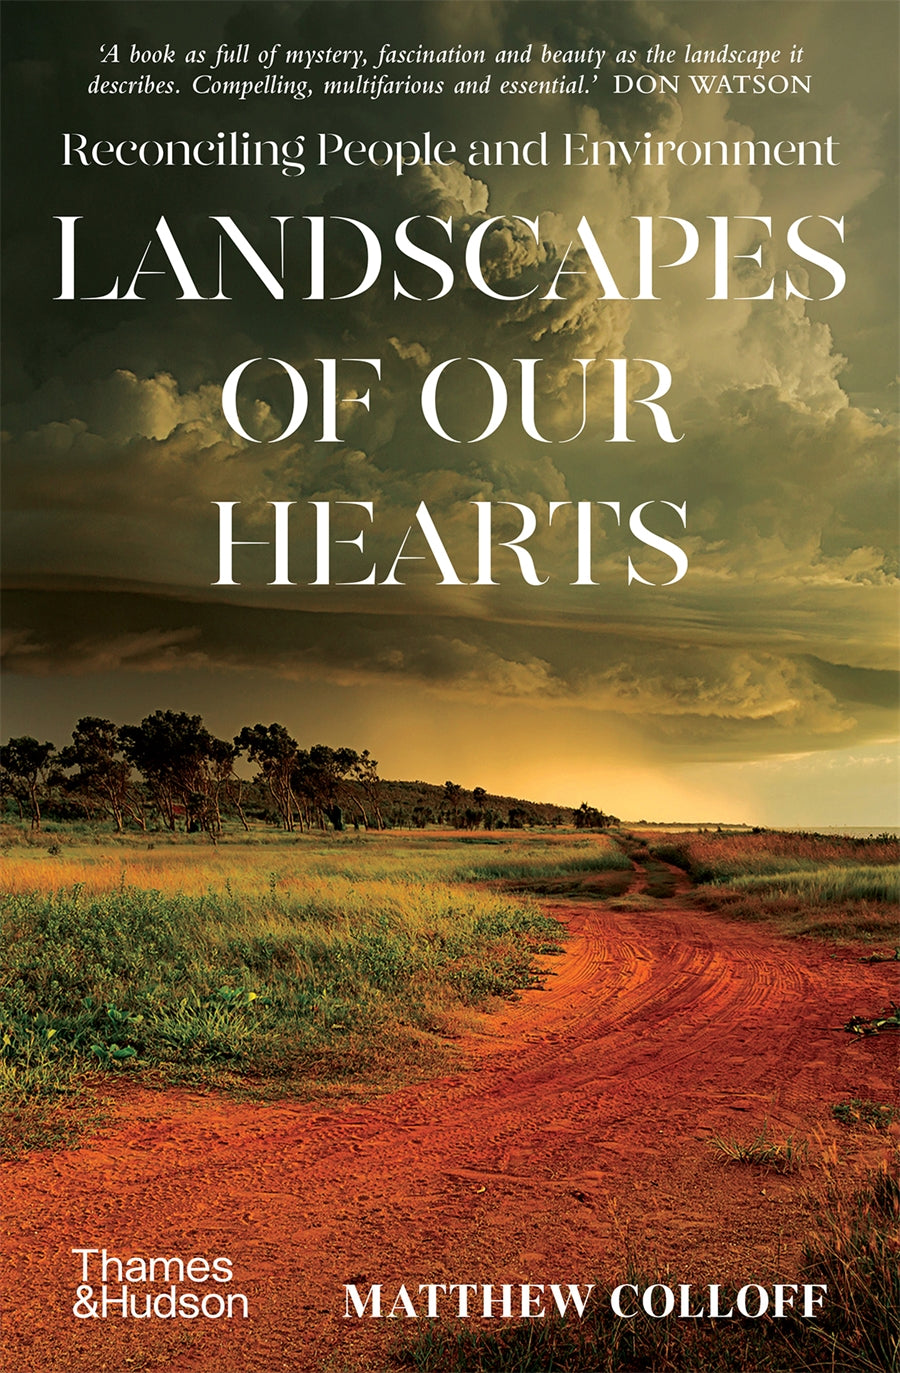 Landscapes of Our Hearts